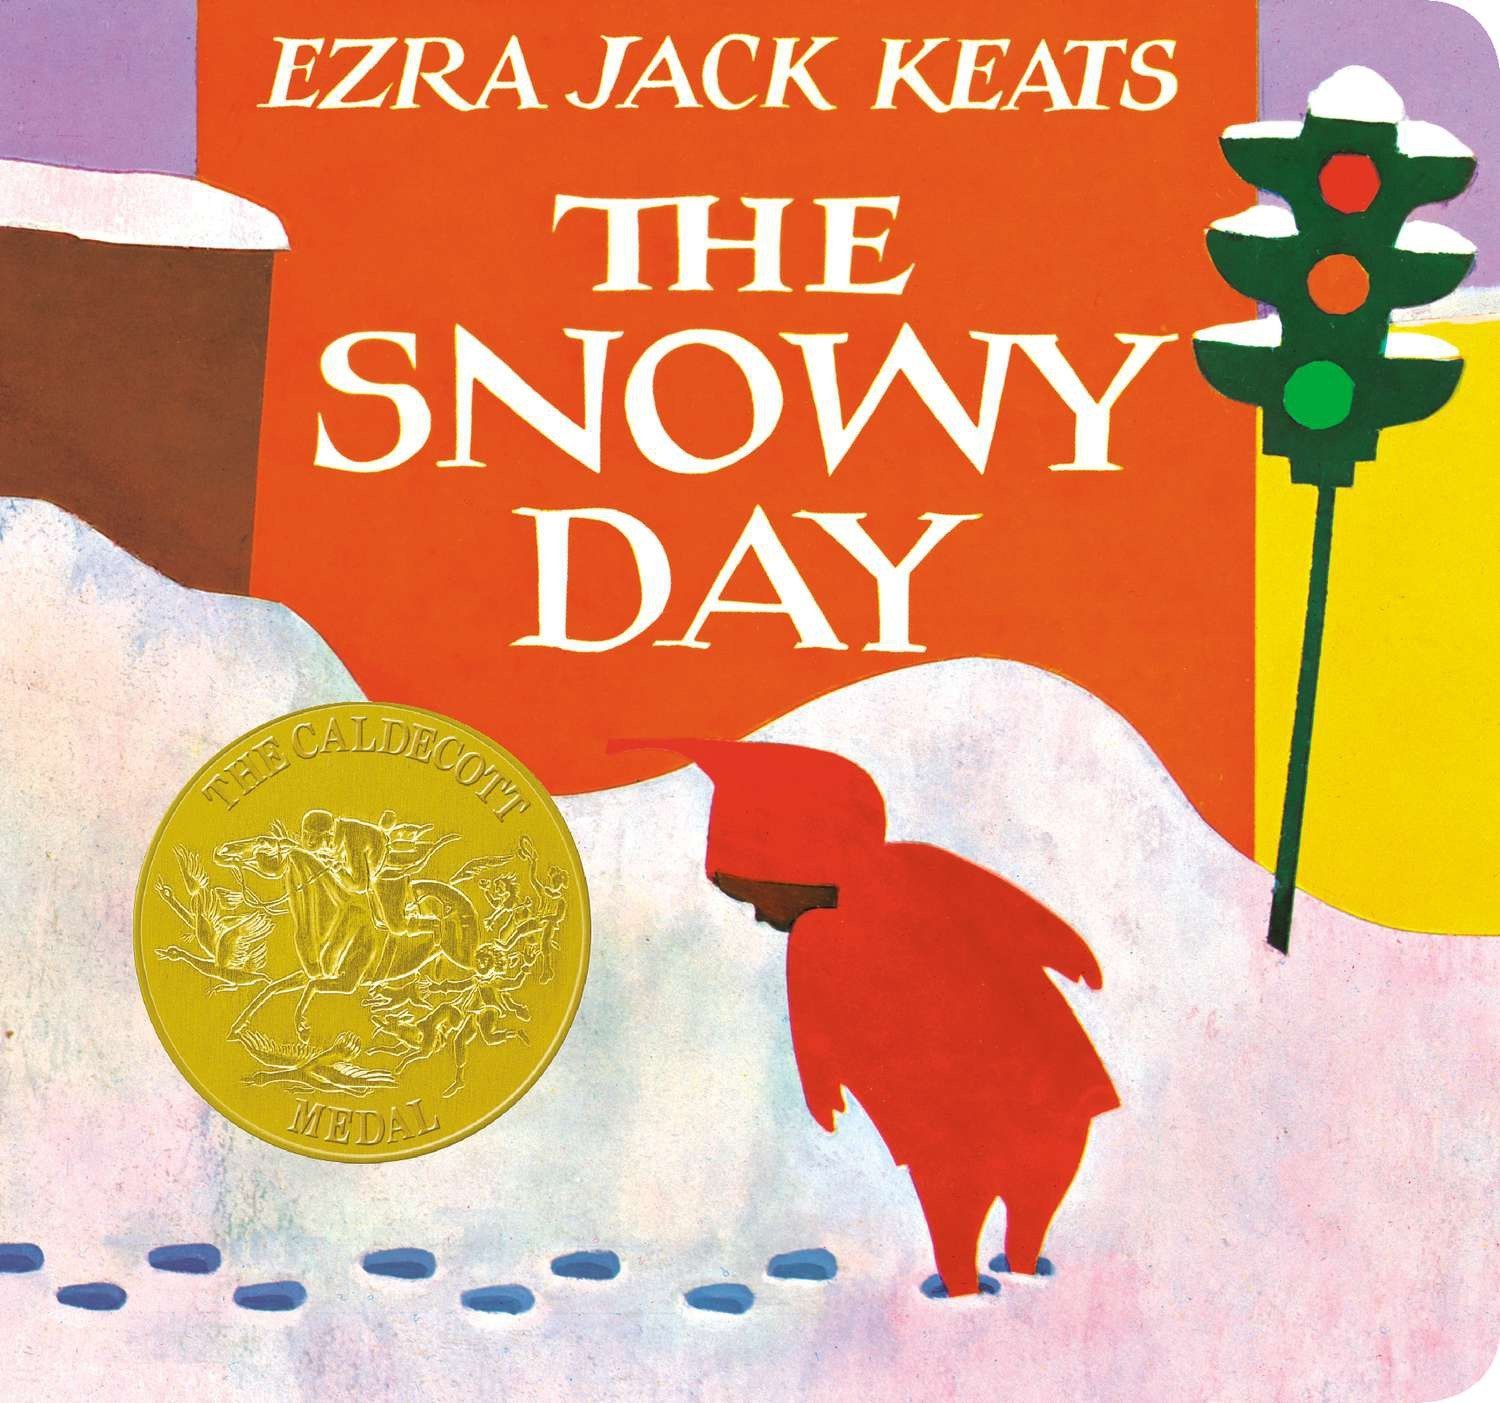 10. 'The Snowy Day'